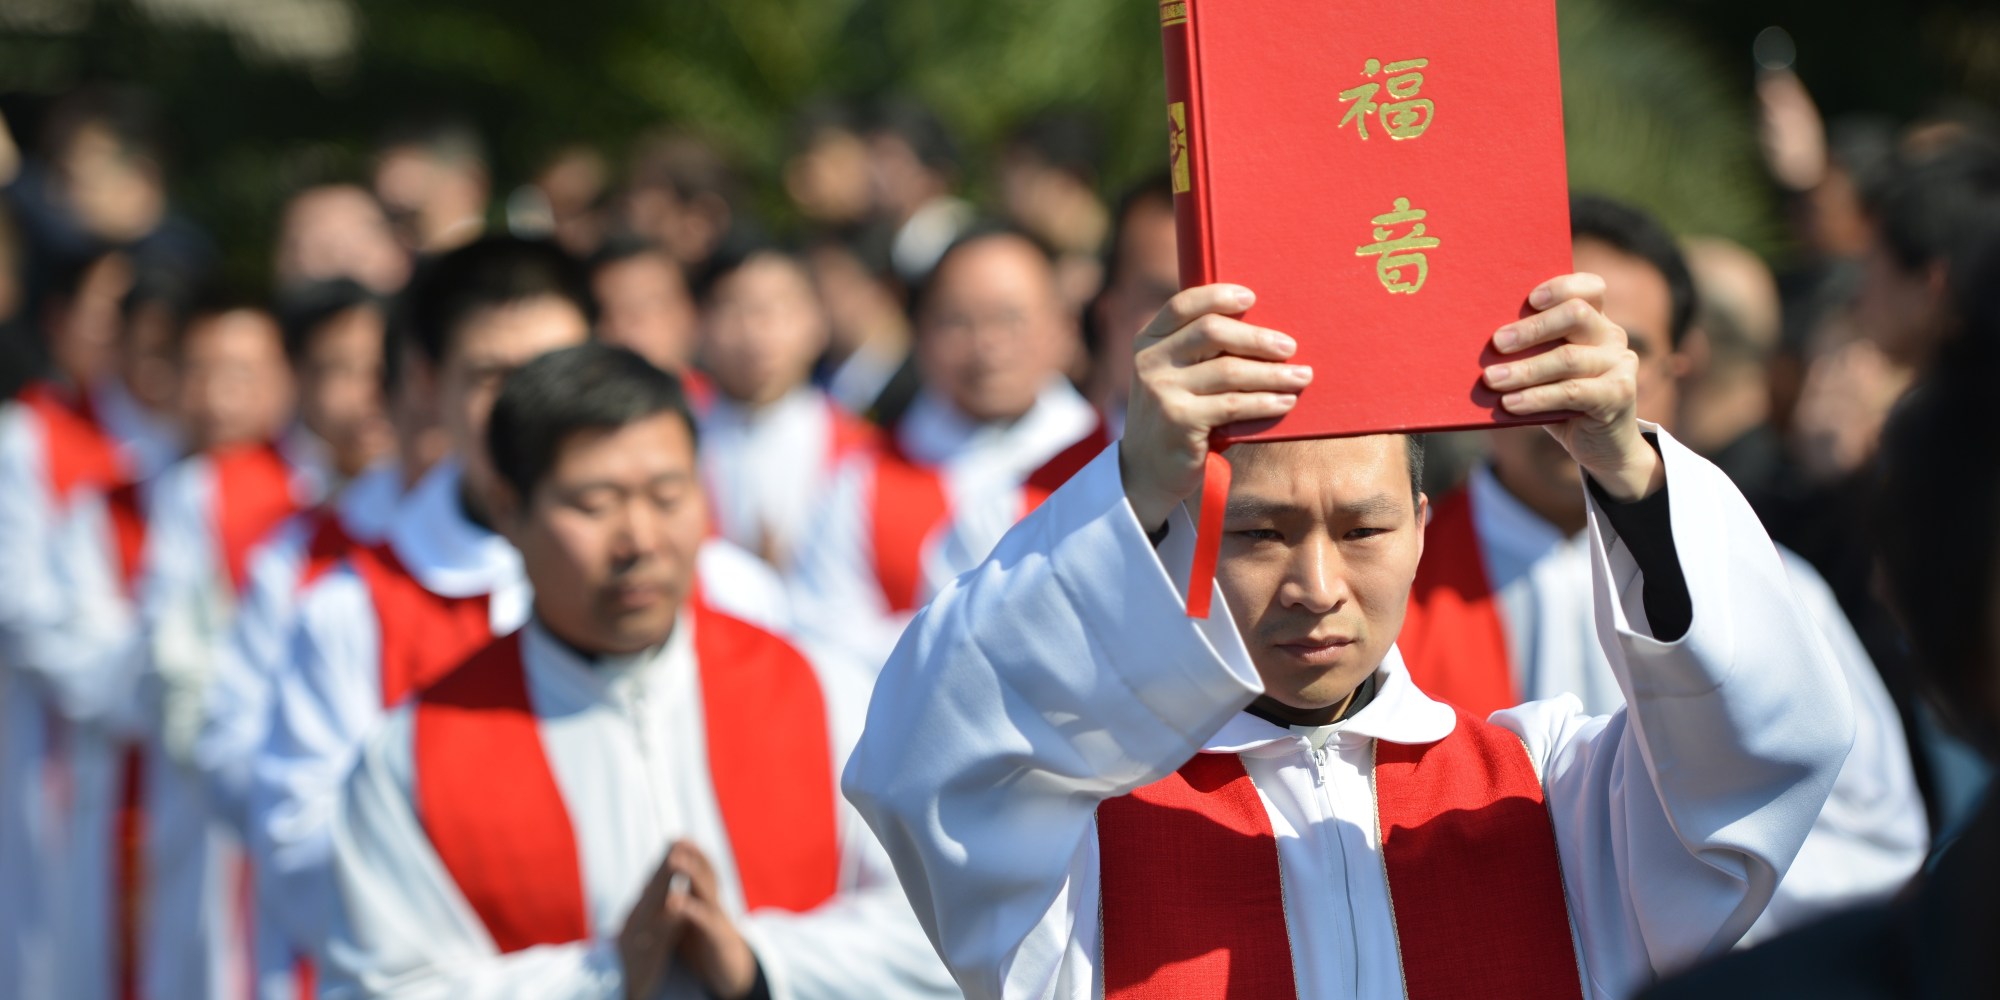 China On Track To World's Largest Christian Country By 2025